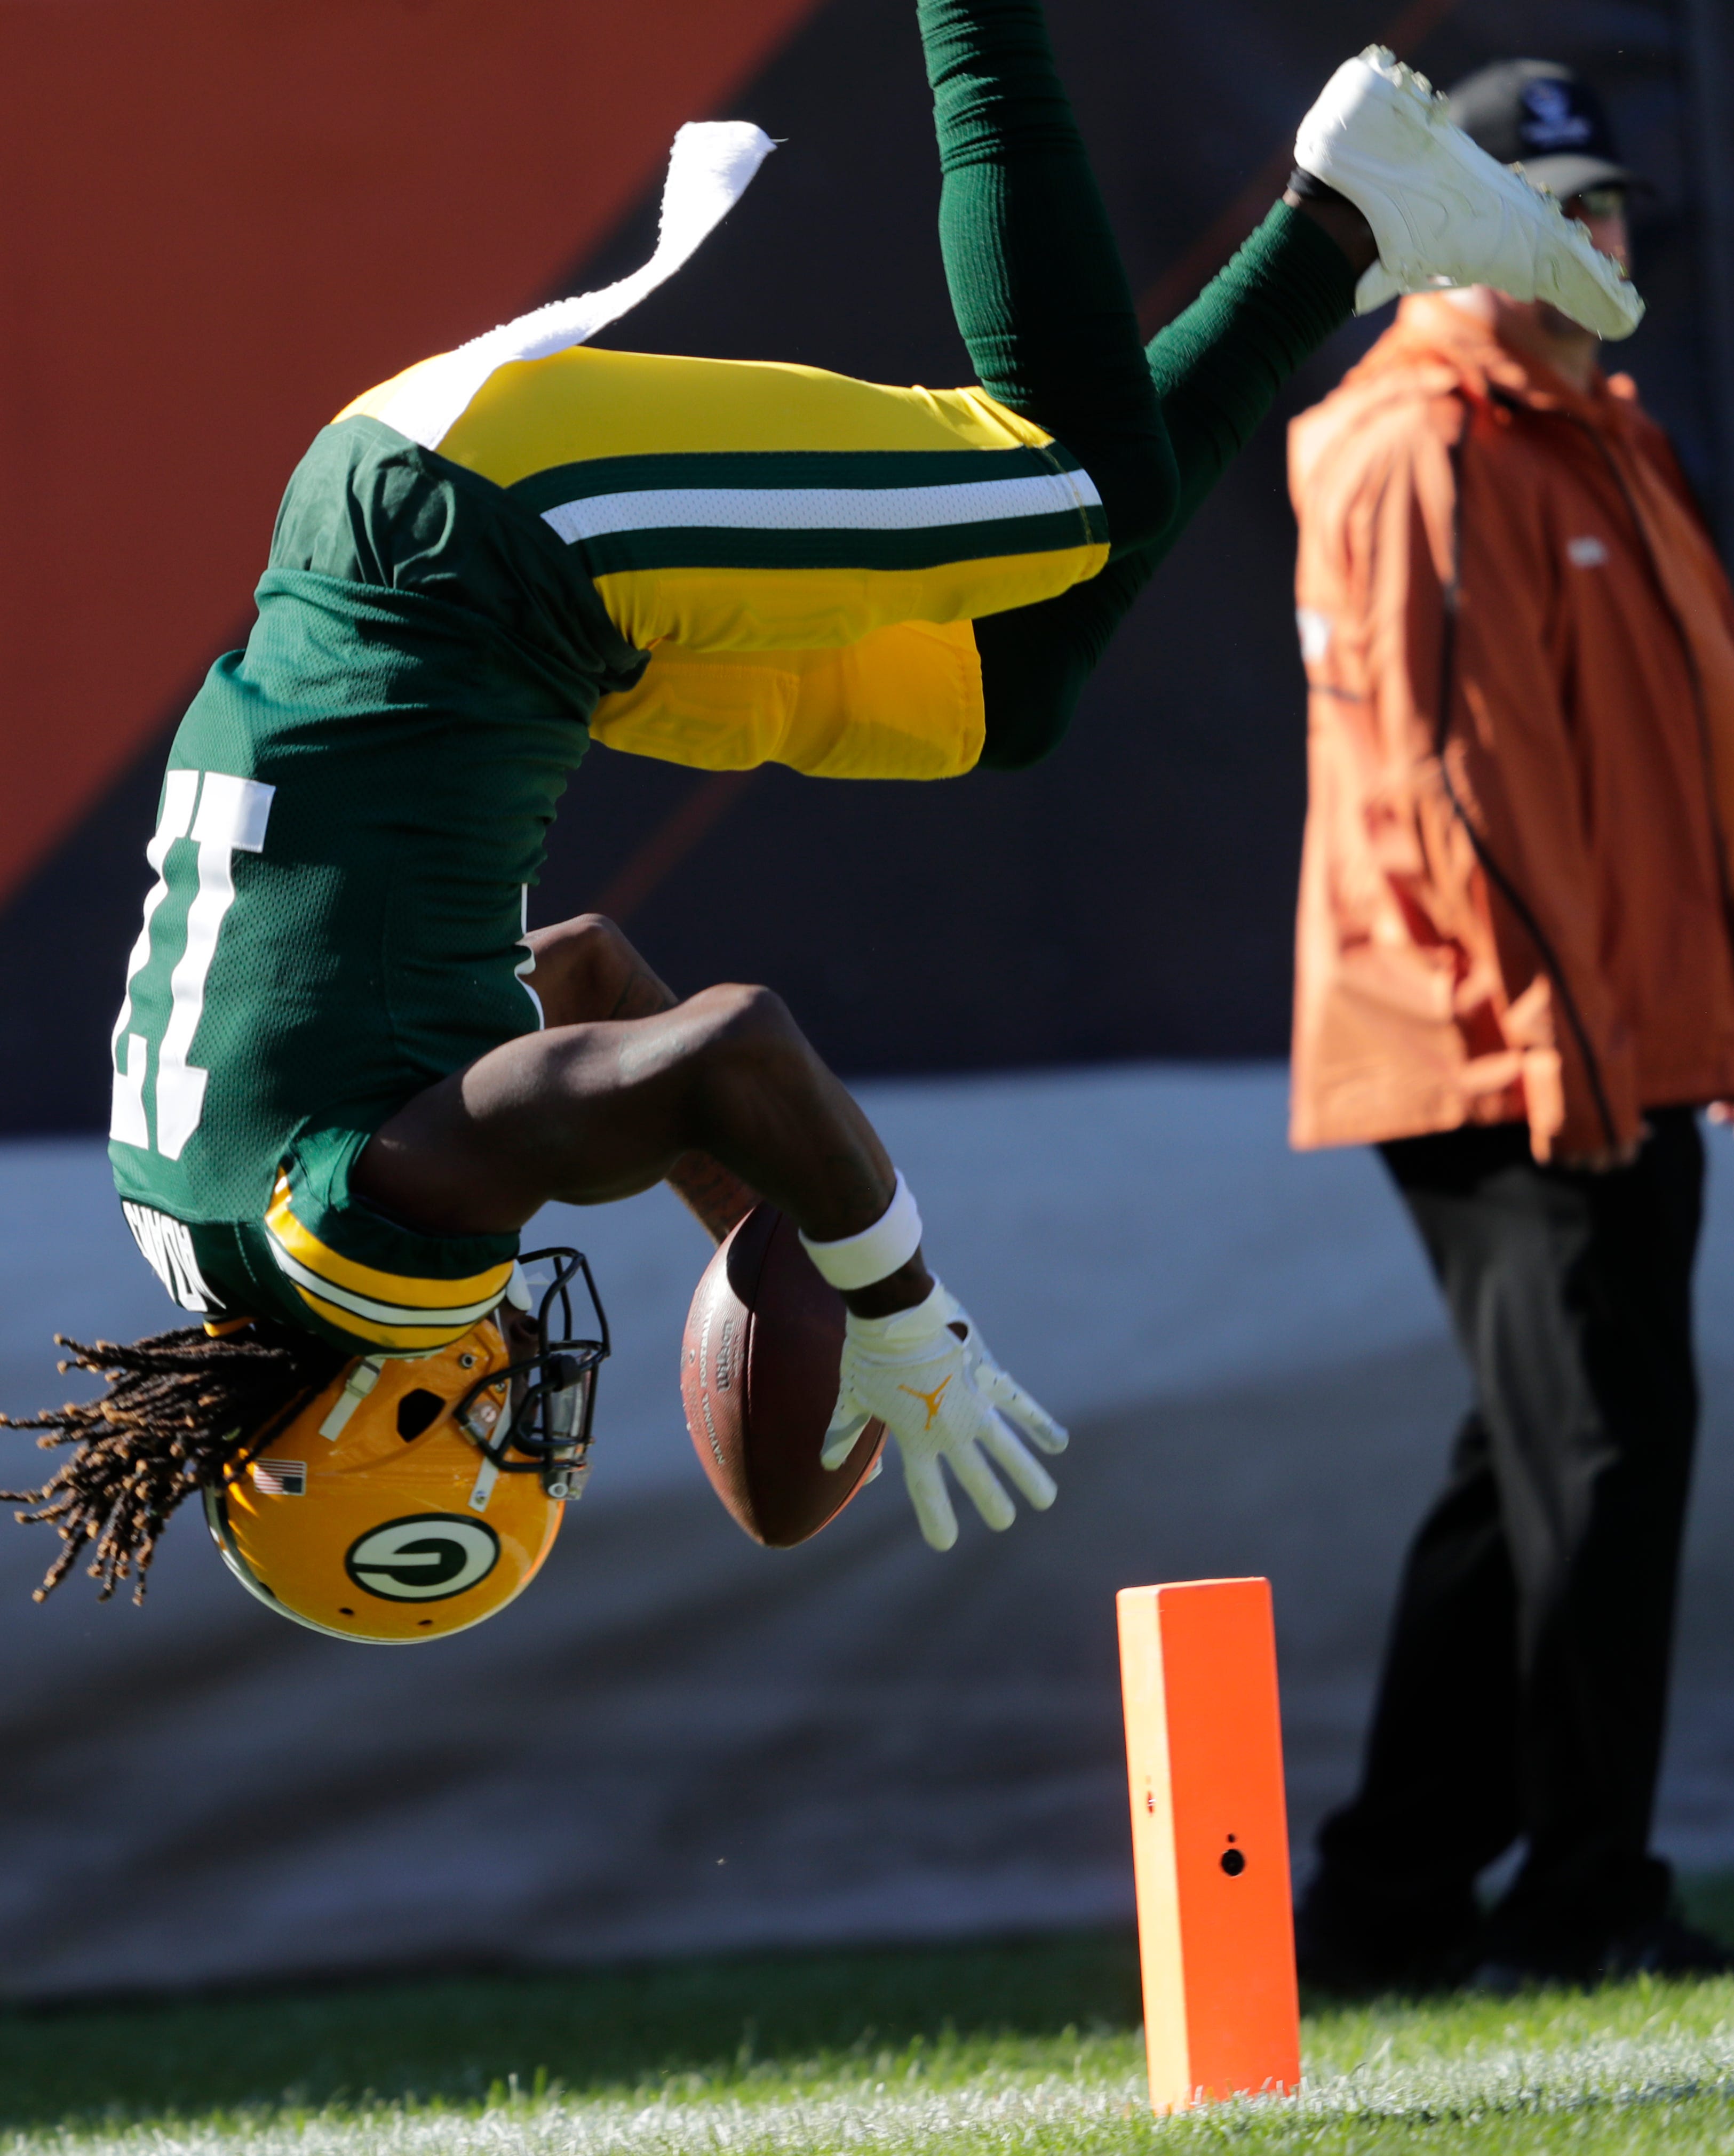 Green Bay Packers wide receiver Davante Adams (17) dives into the end zone after a long first down reception in the fourth quarter against the Chicago Bears during their football game Sunday, Oct. 17, 2021, at Soldier Field in Chicago, Ill. Adams stepped out of bounds before reaching the end zone. Green Bay won 24-14.